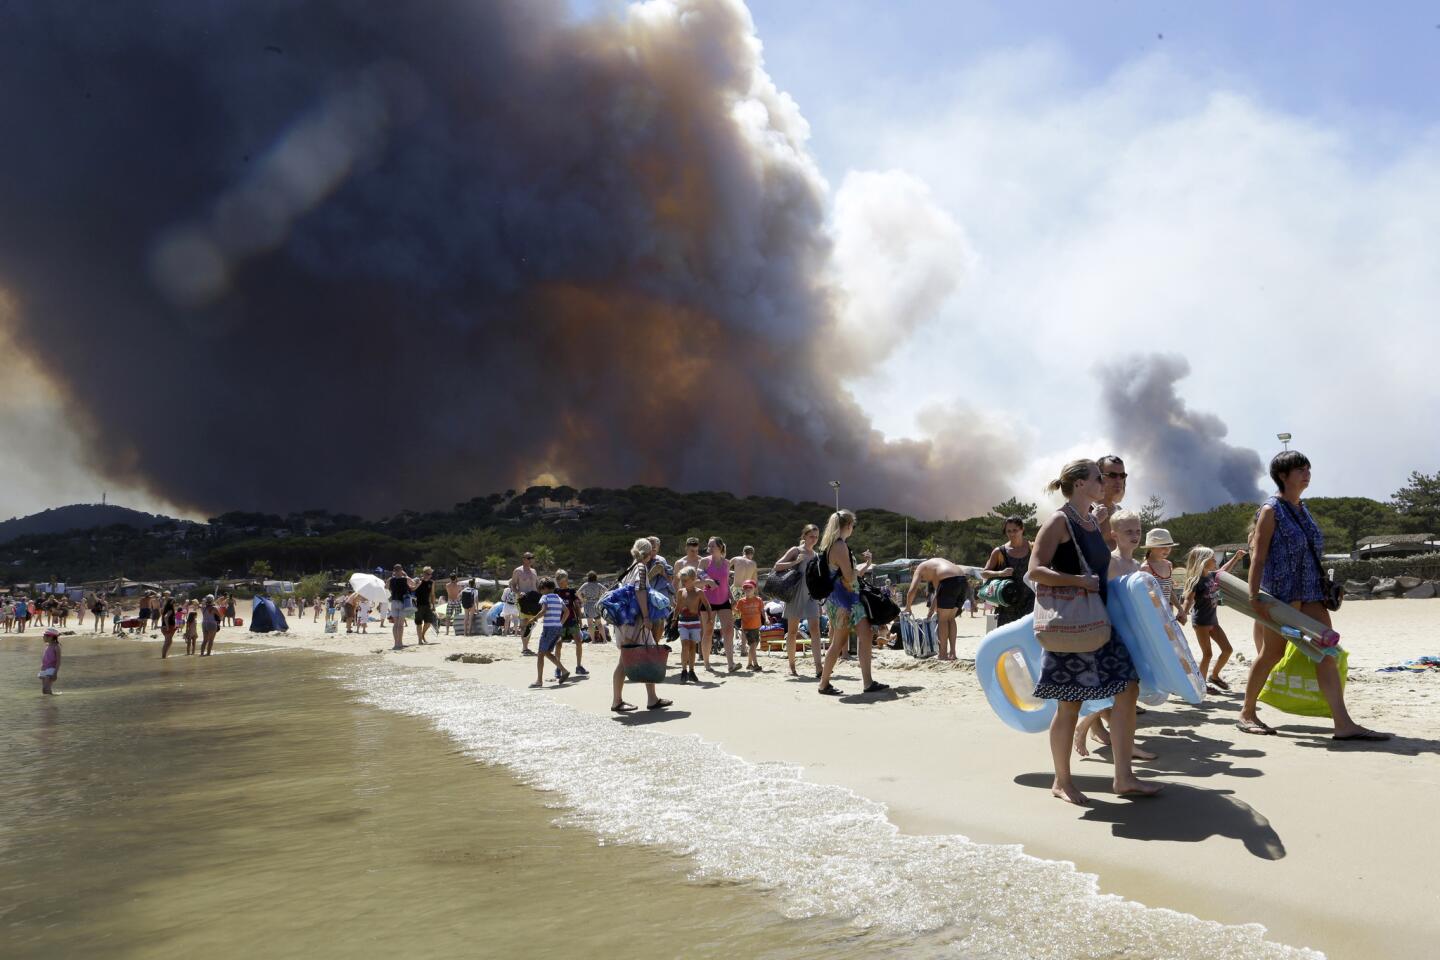 Sunbathers are evacuated from the beach in Le Lavandou, in the French Riviera, as plumes of smoke rise from a nearby wildfire on July 26, 2017. French authorities ordered the evacuation of up to 12,000 people around a picturesque hilltop town in the southern Cote d'Azur region as fires hopscotched around the Mediterranean coast for a third day.